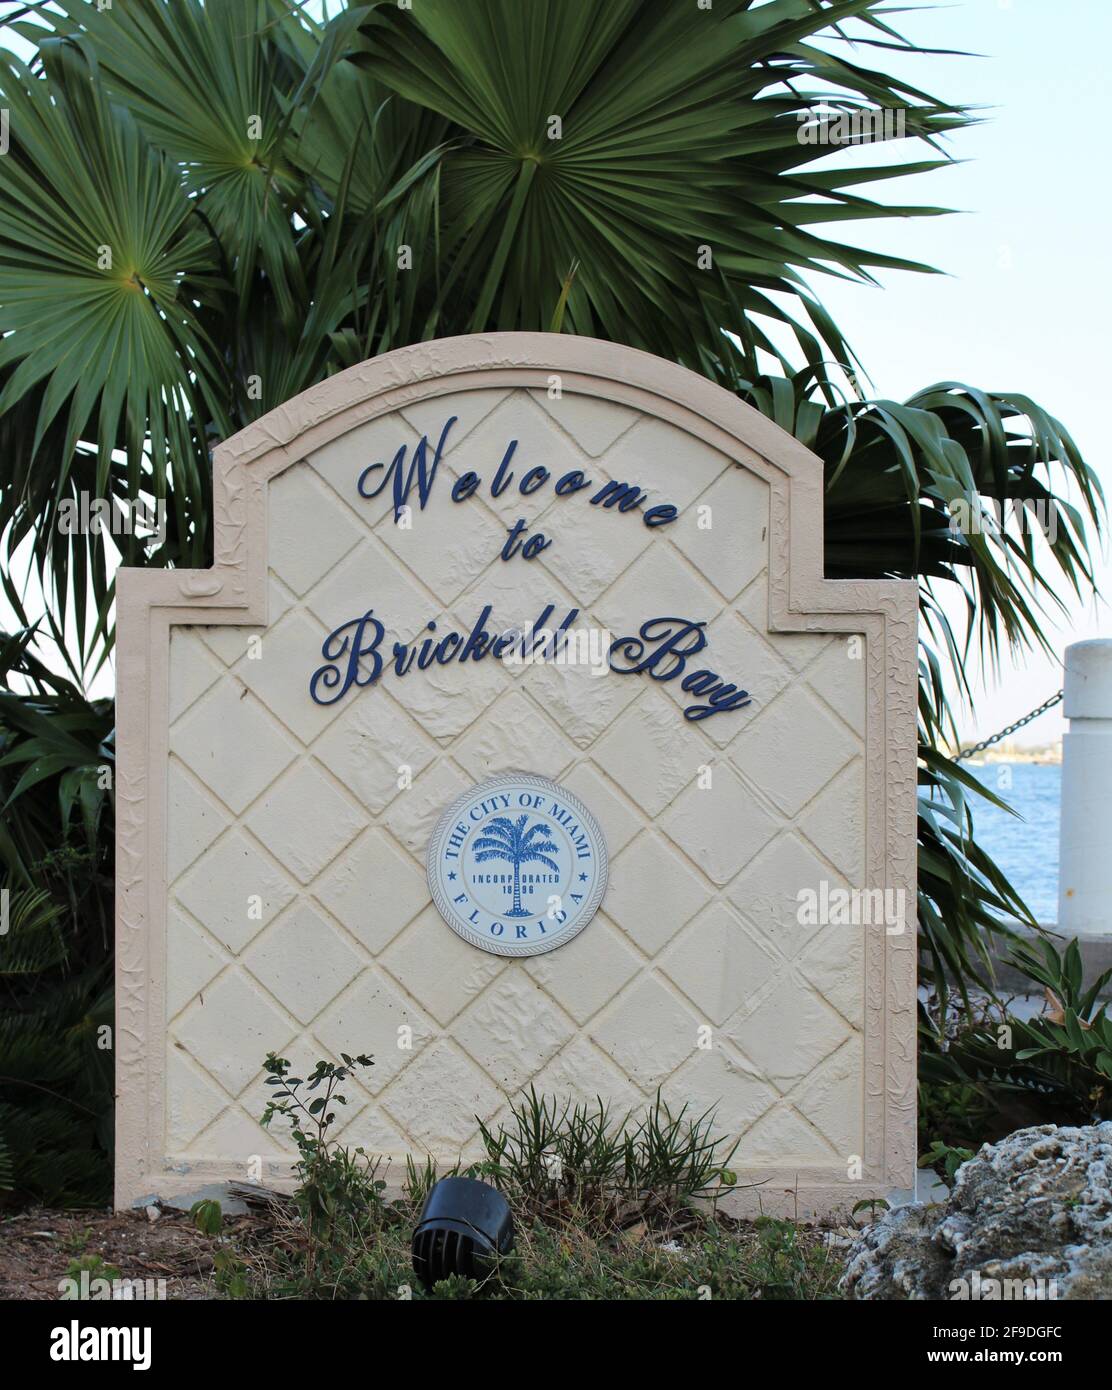 Sign welcoming people to Biscayne Bay in Brickell, Miami, Florida. Stock Photo